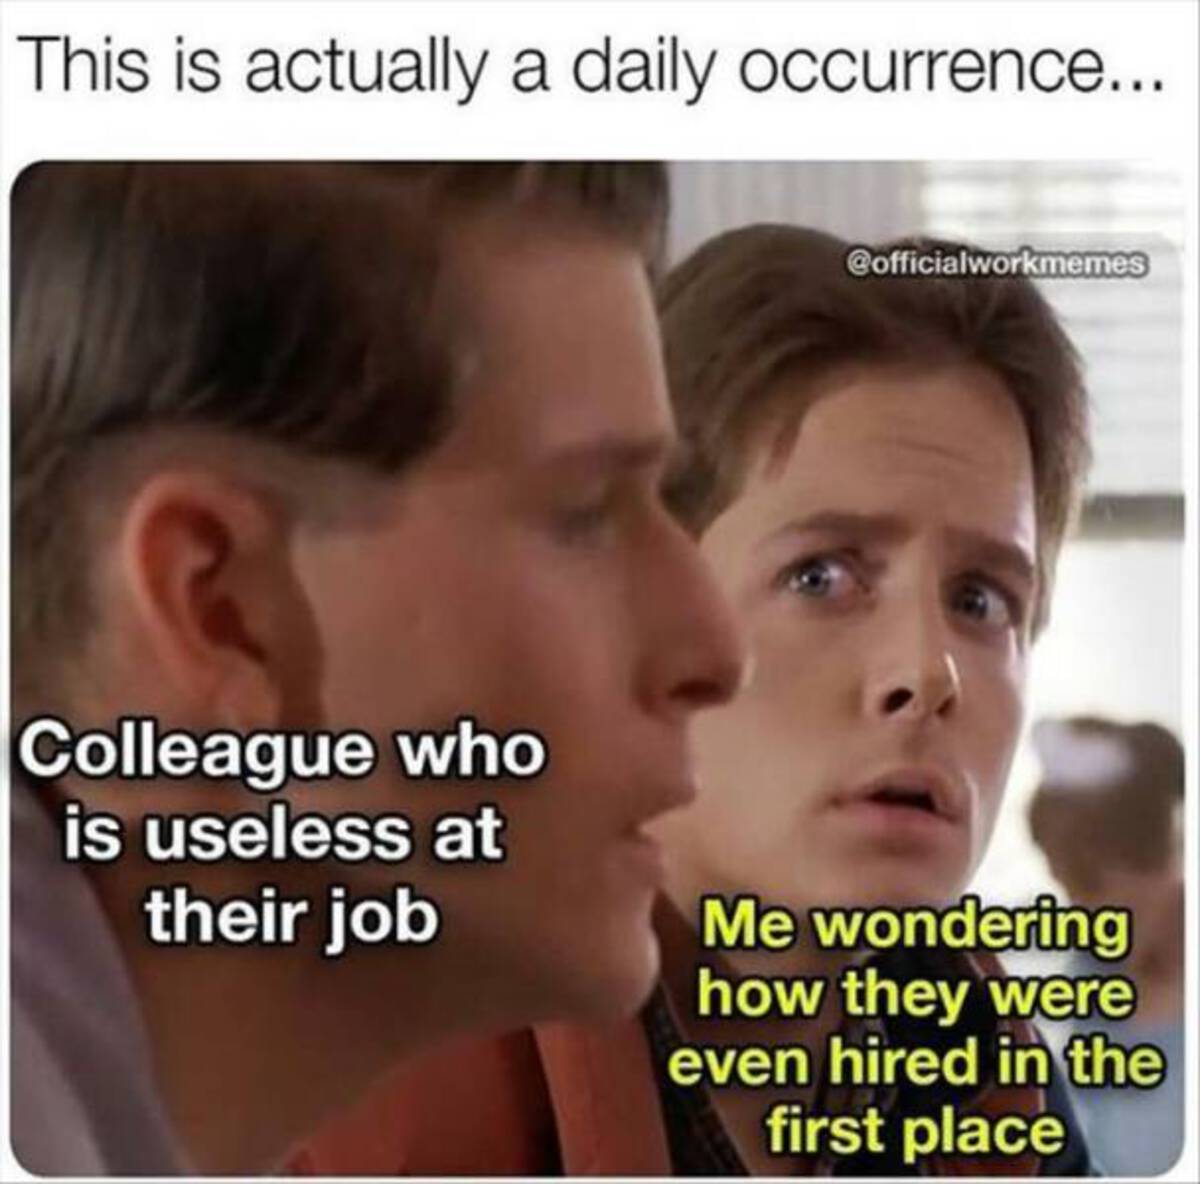 photo caption - This is actually a daily occurrence... Colleague who is useless at their job Me wondering how they were even hired in the first place